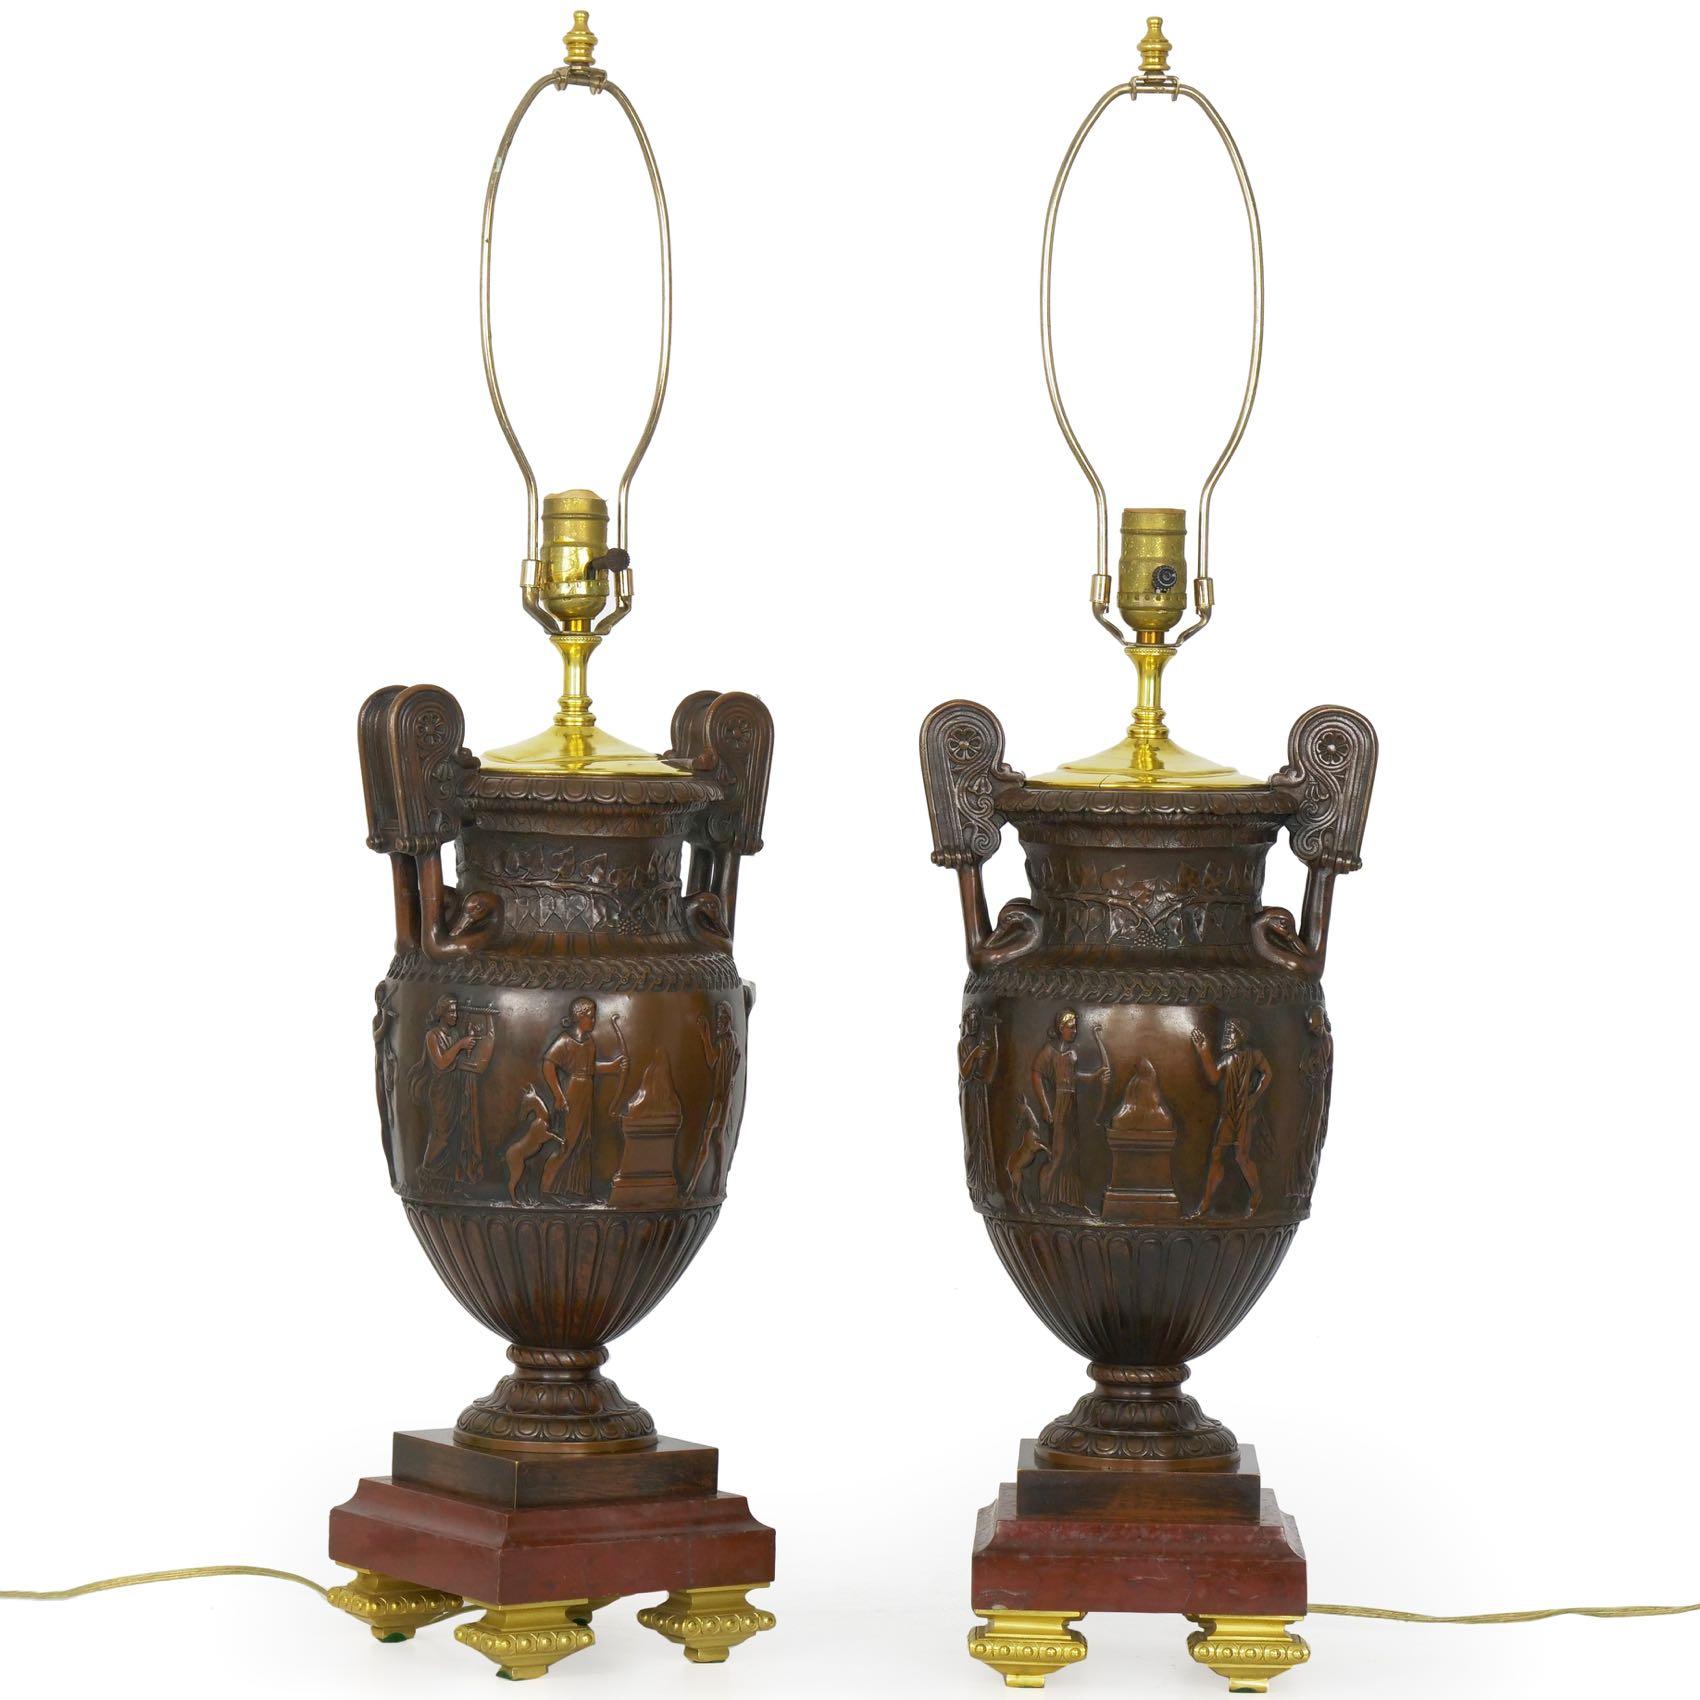 A handsome pair of lamps likely designed after the Olympian deities of the Greek pantheon, this finely cast pair of patinated bronze lamps are in the form of an Amphora vases with a turned brass cap through which the electrical element projects.